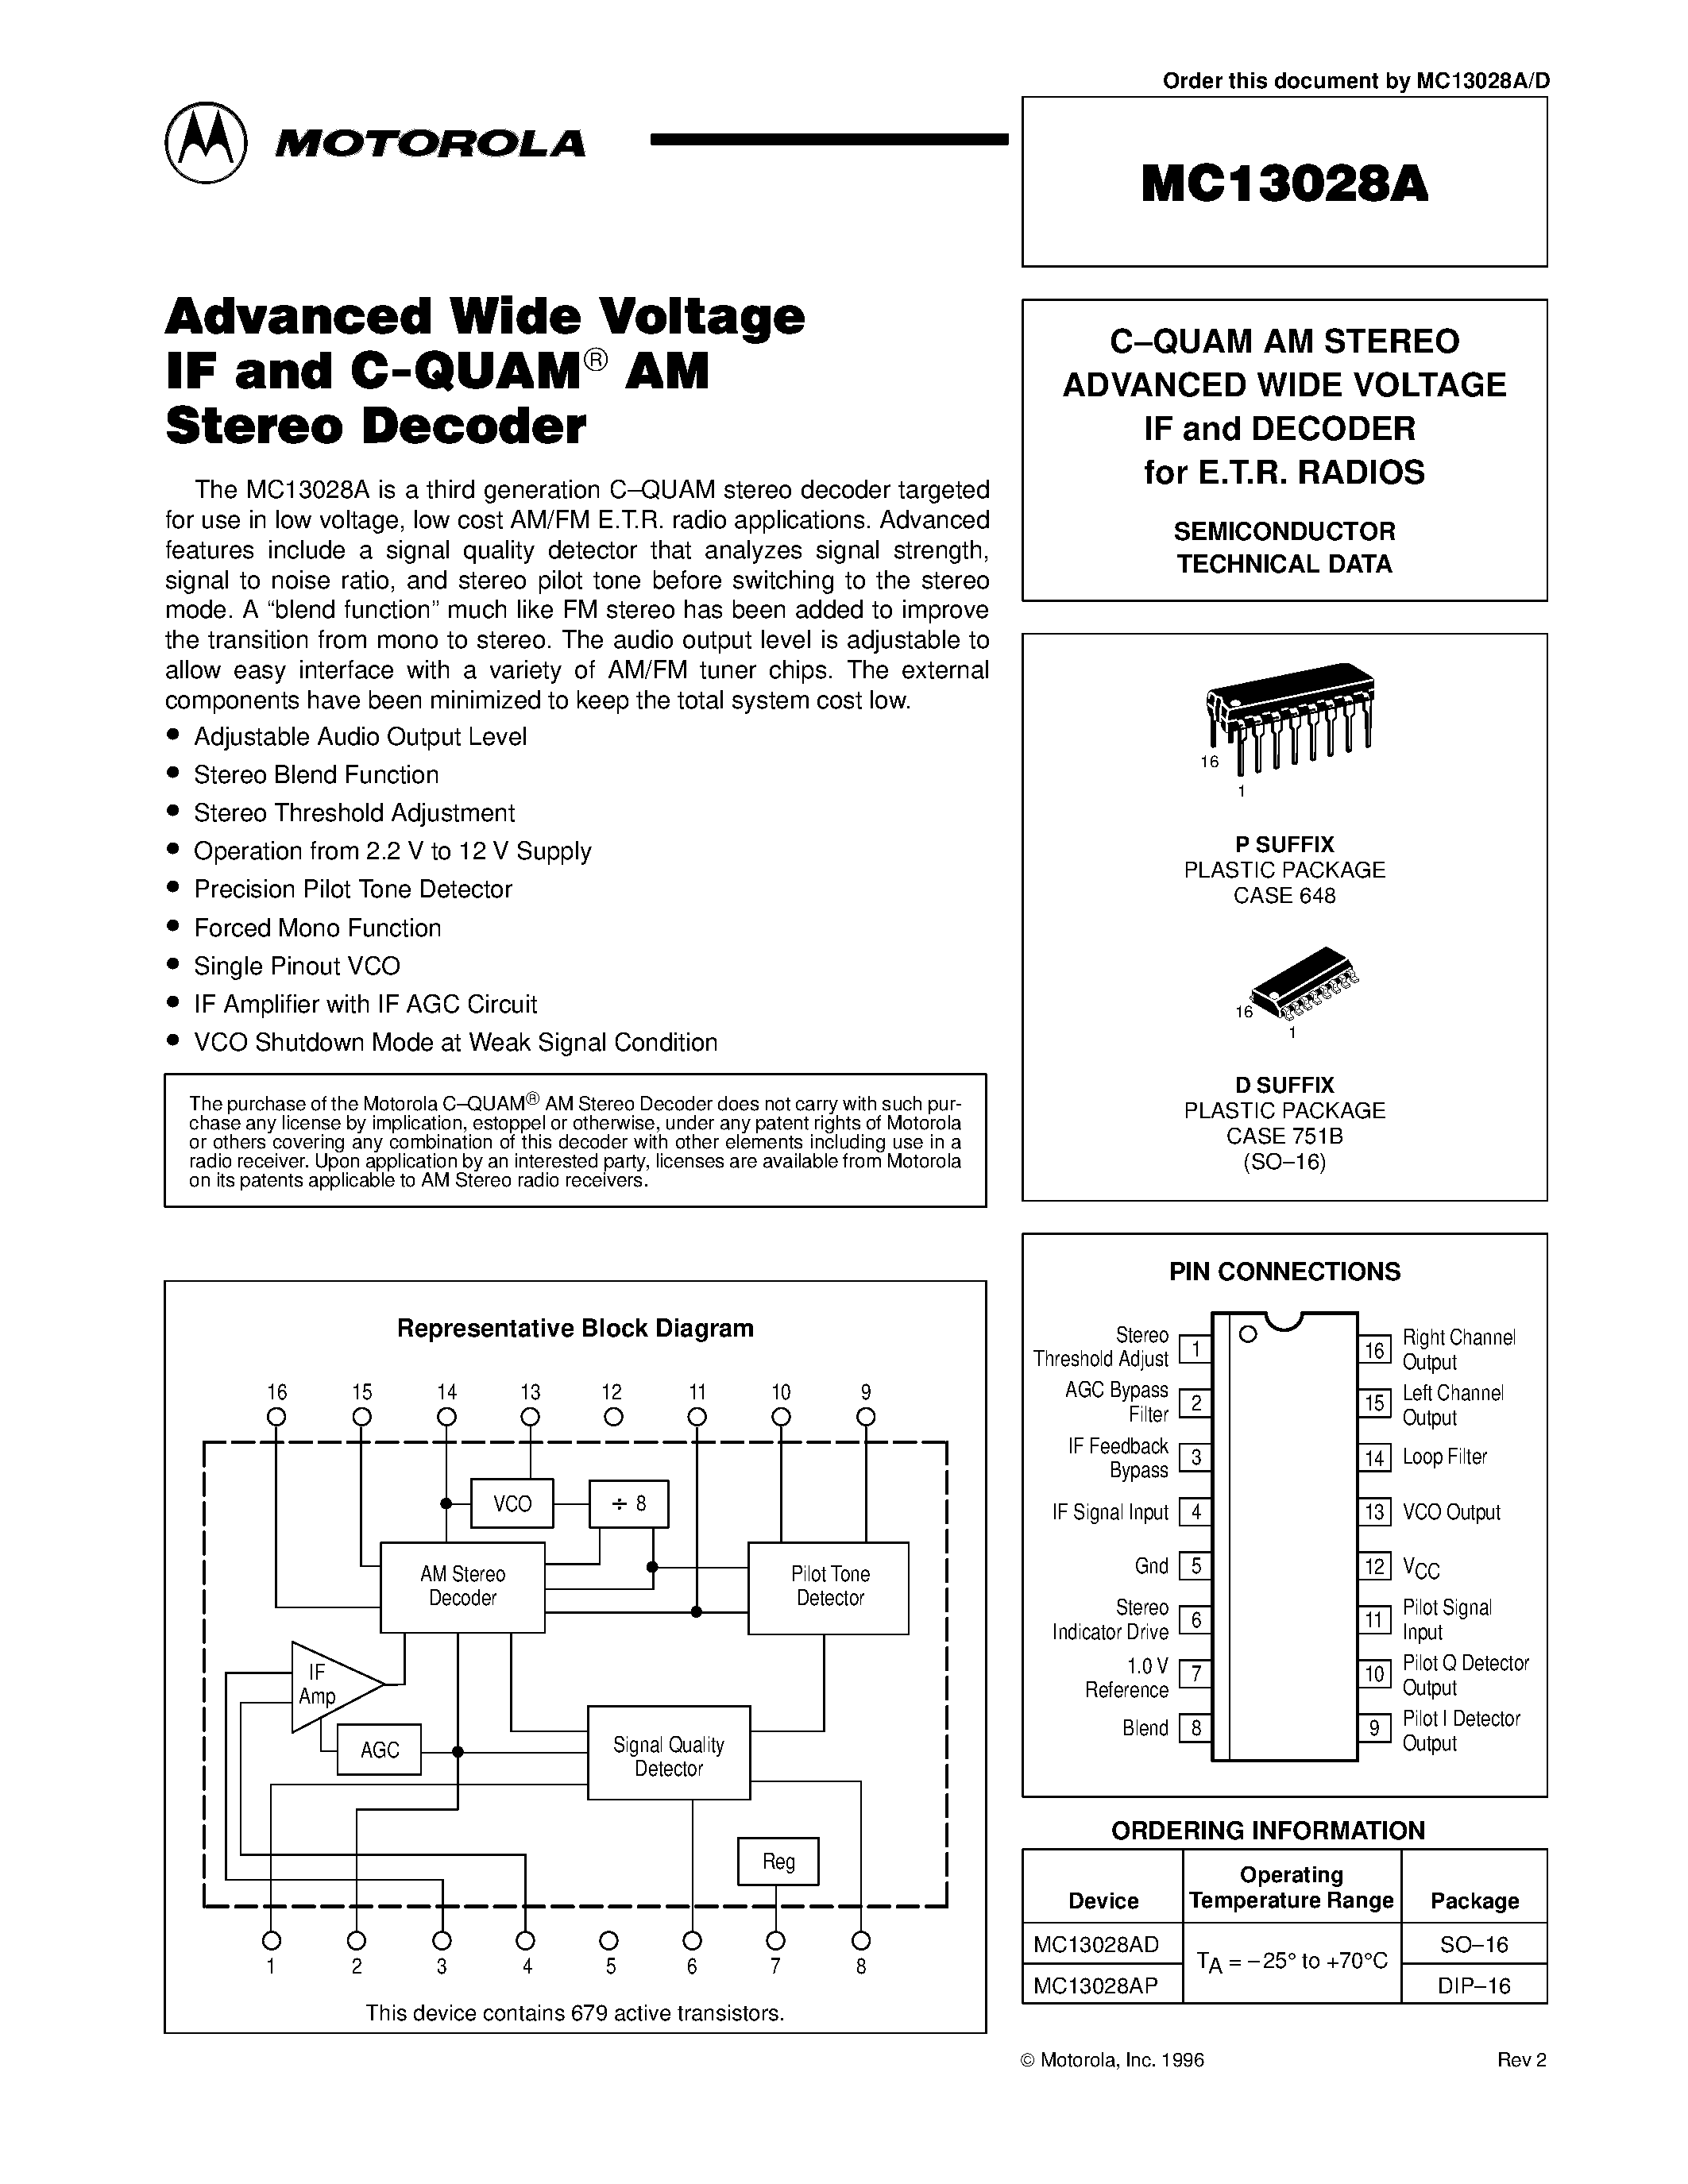 Datasheet MC13028AP - C-QUAM AM STEREO ADVANCED WIDE VOLTAGE IF and DECODER for E.T.R. RADIOS page 1